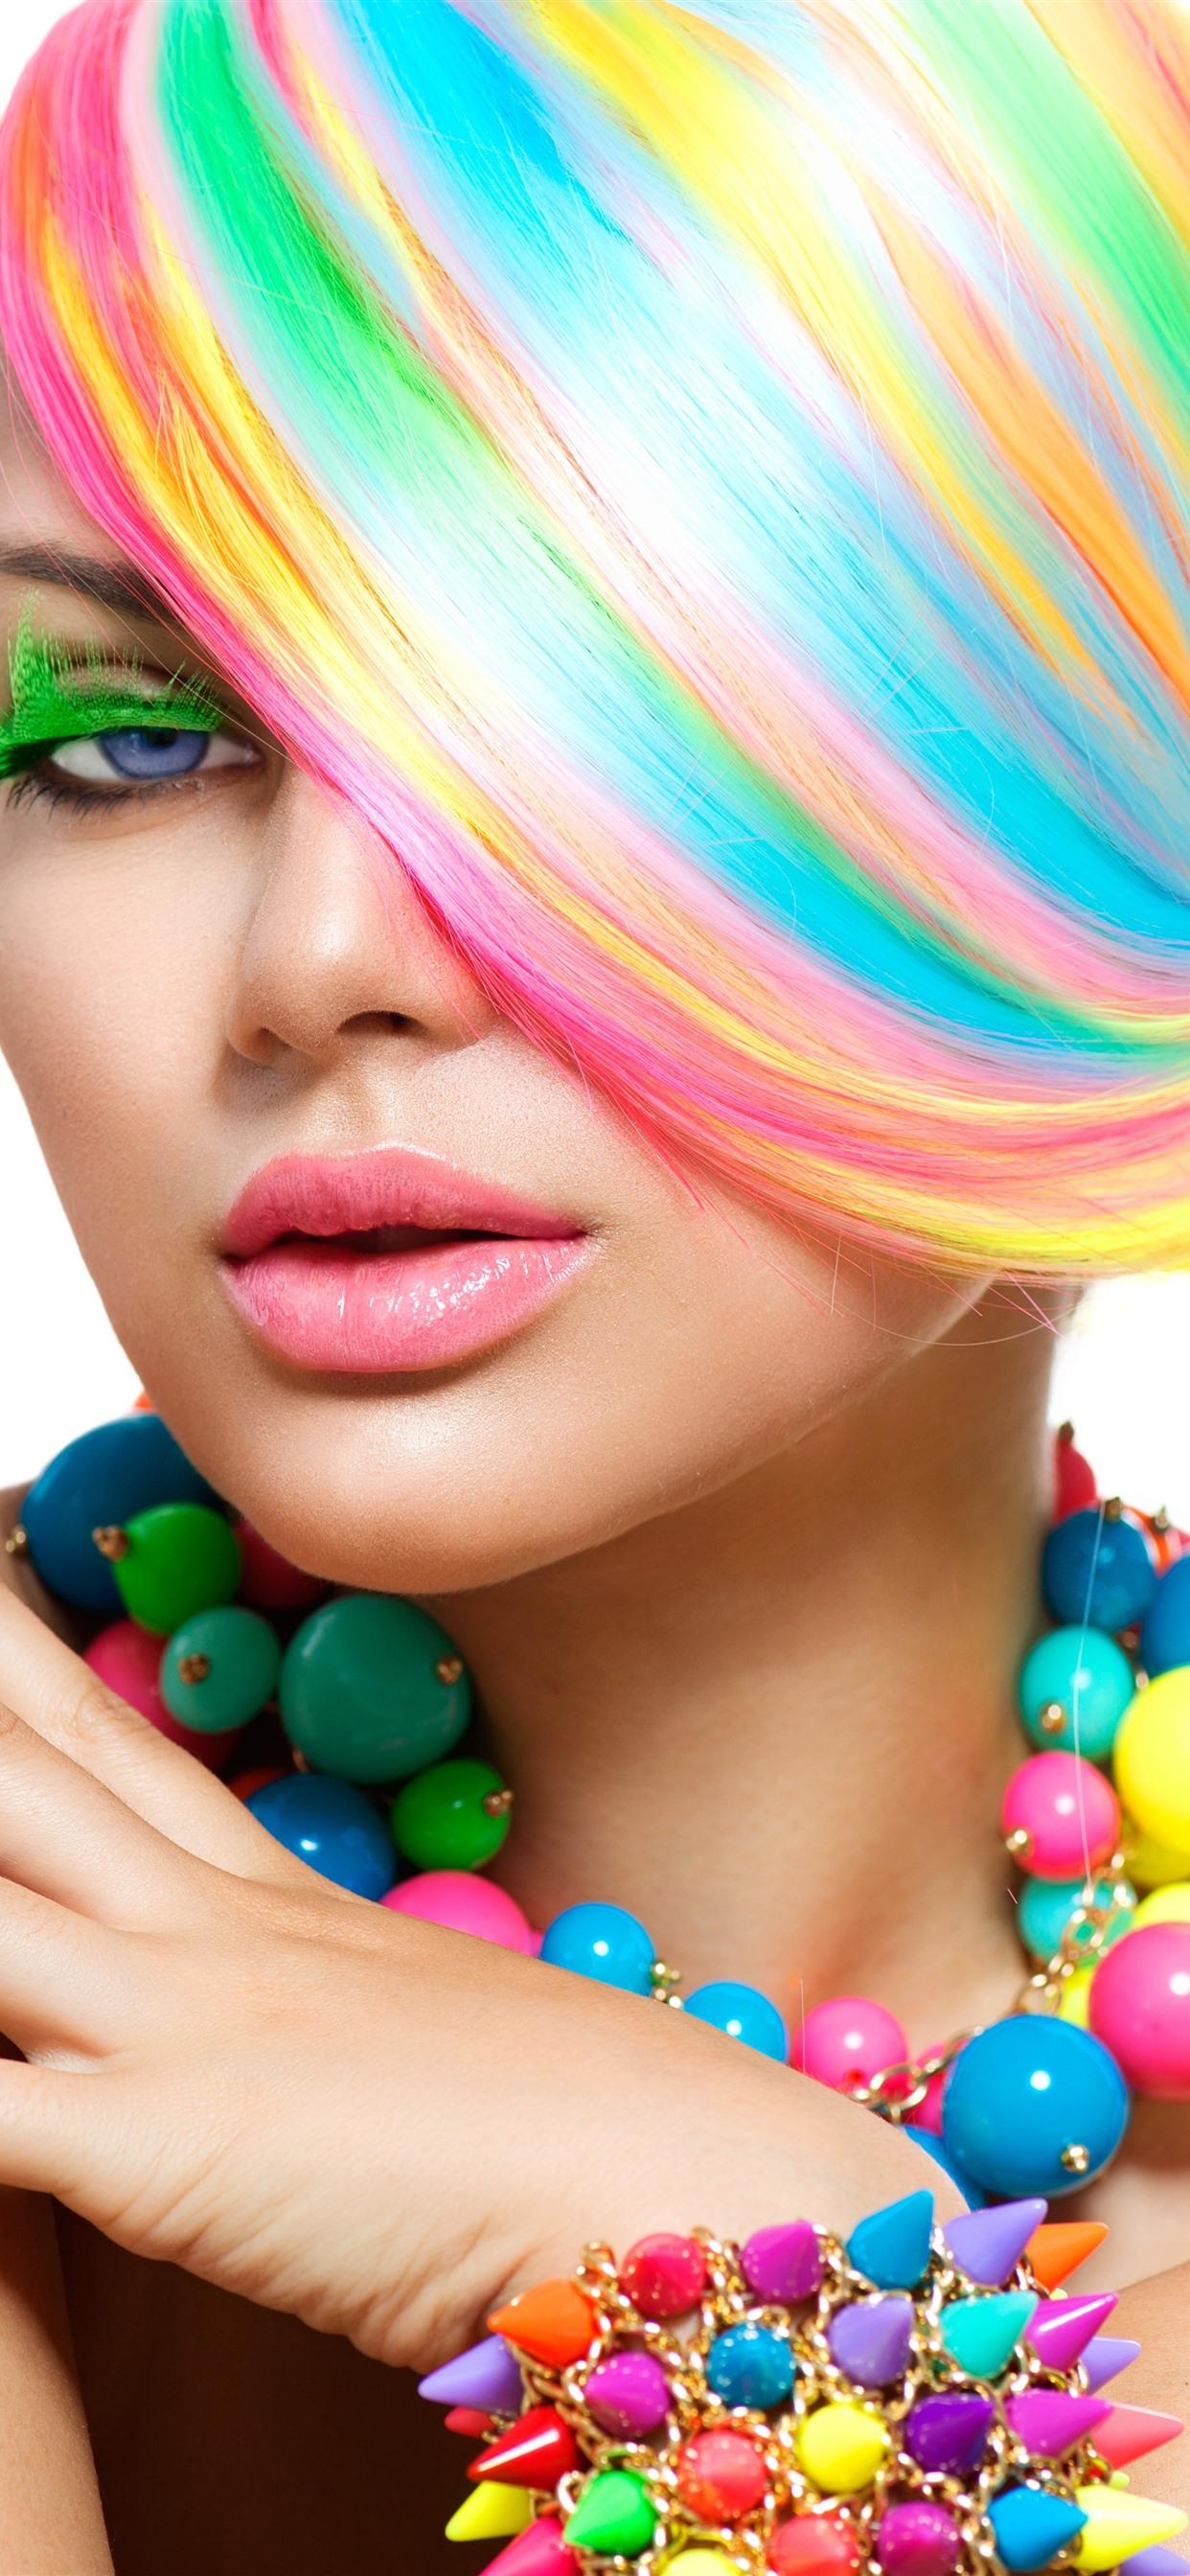 Fashion Girl, Rainbow Colors Hair, Colorful Beads 1242x2688 IPhone 11 Pro XS Max Wallpaper, Background, Picture, Image